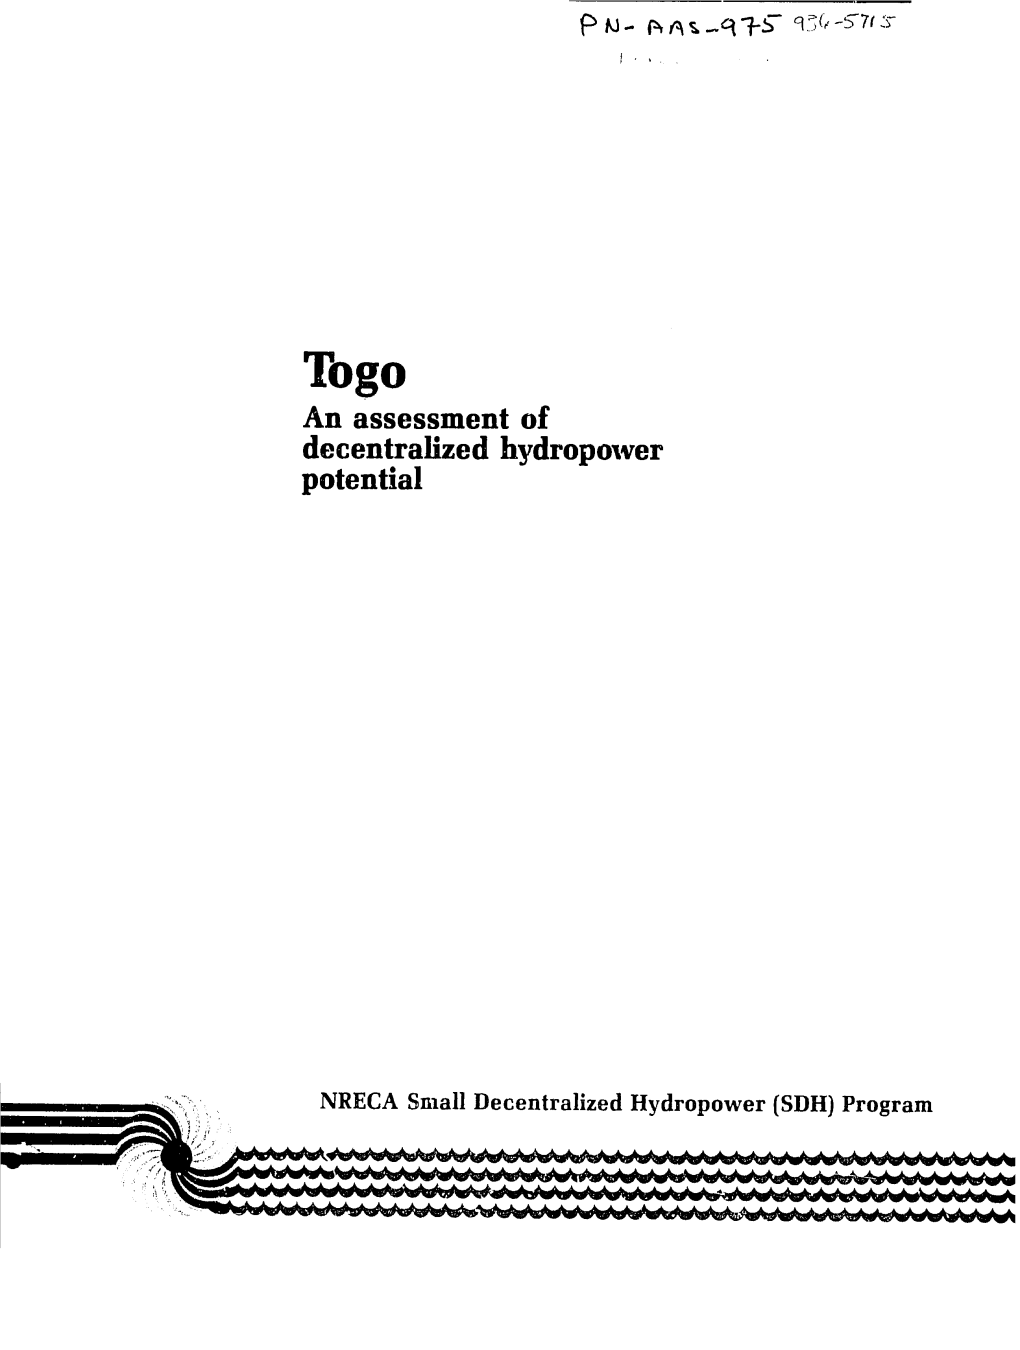 Togo an Assessment of Decentralized Hydropower Potential